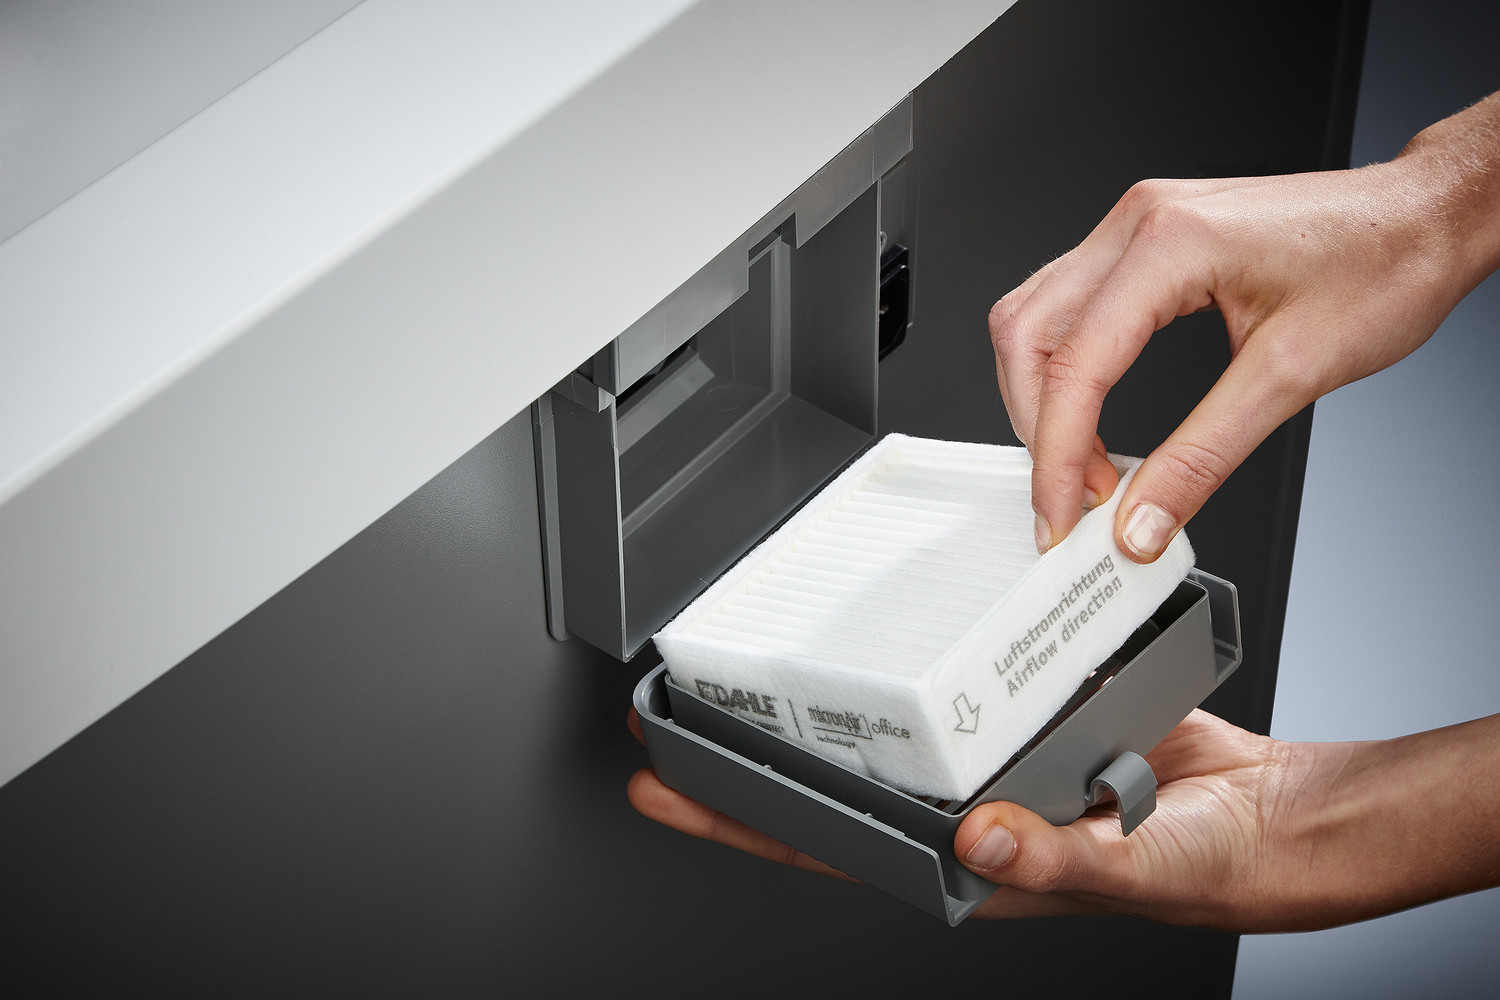 Improved indoor climate even when in heavy use: the unique DAHLE CleanTEC® filter system reduces fine dust pollution from the document shredder